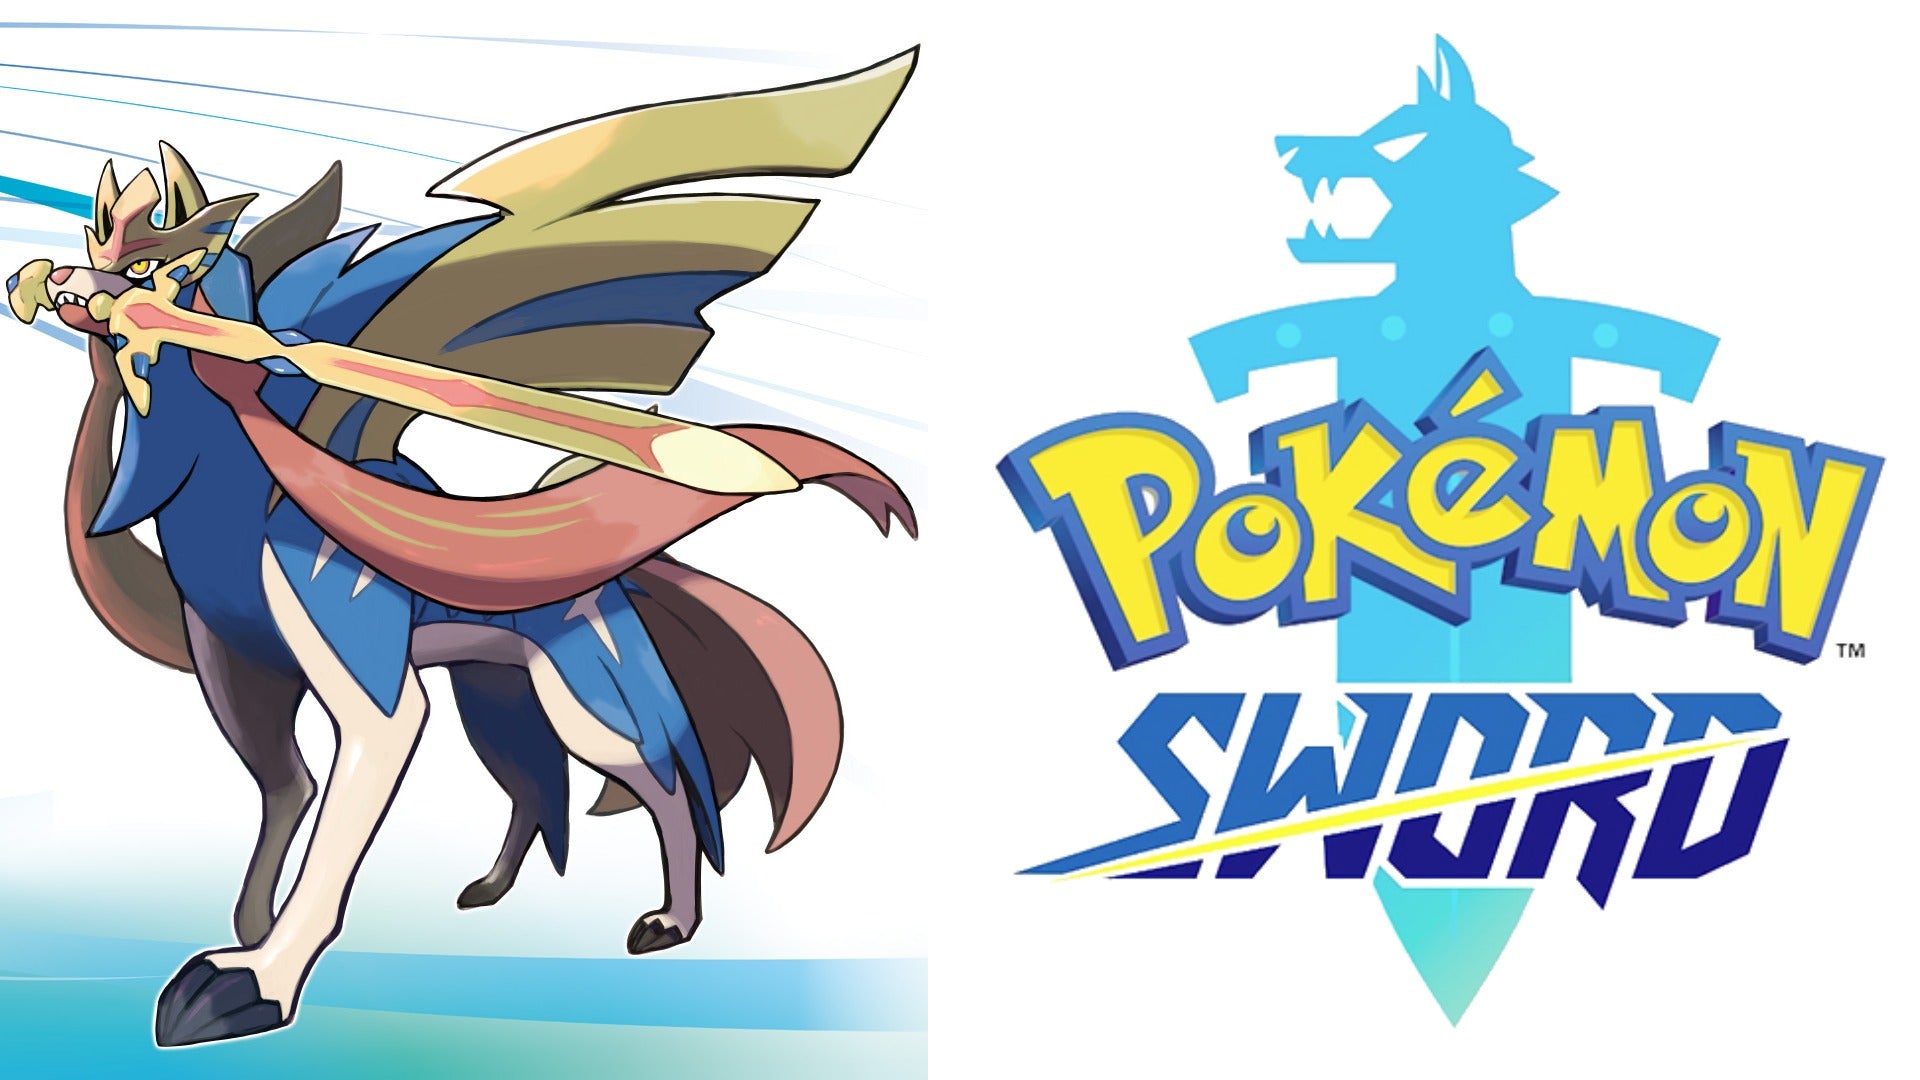 The exclusive Pokémon in Sword and Shield cover 1 pokemon faction